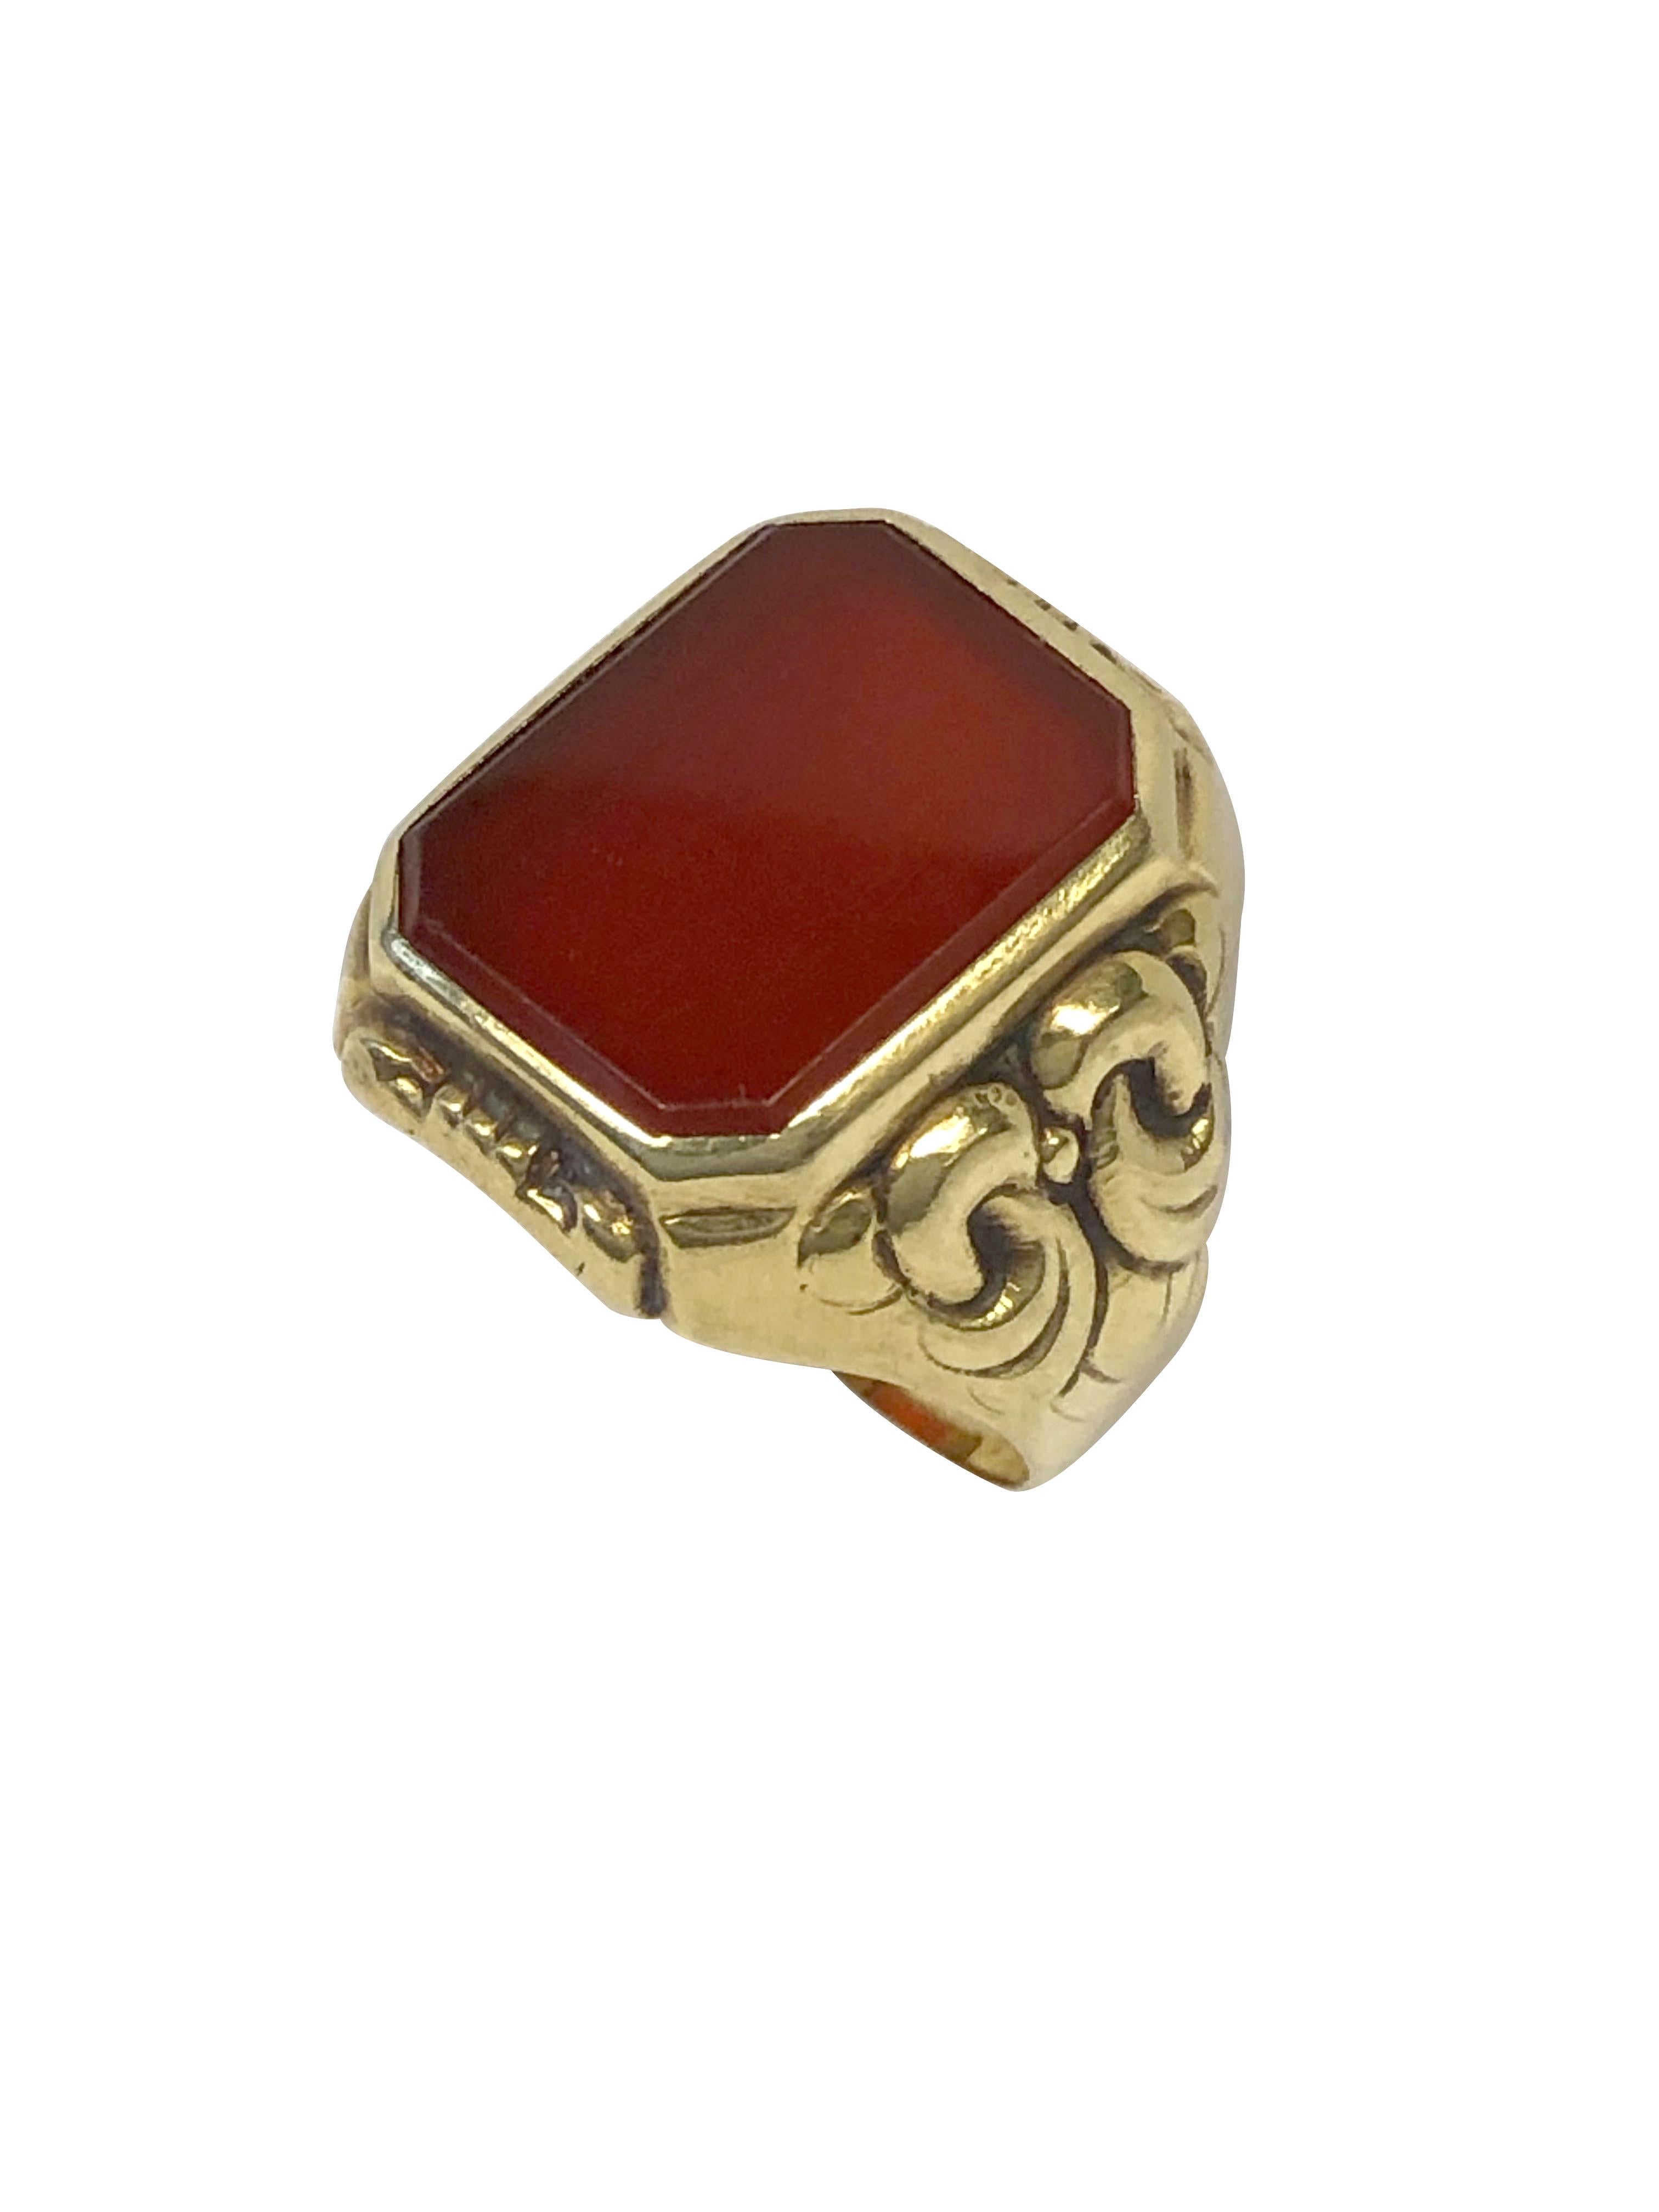 Circa 1920 European 14k Yellow Gold Signet Ring, centrally set with a Carnelian, the top of the ring measures 5/8 X 5/8 inch, finger size 6. 